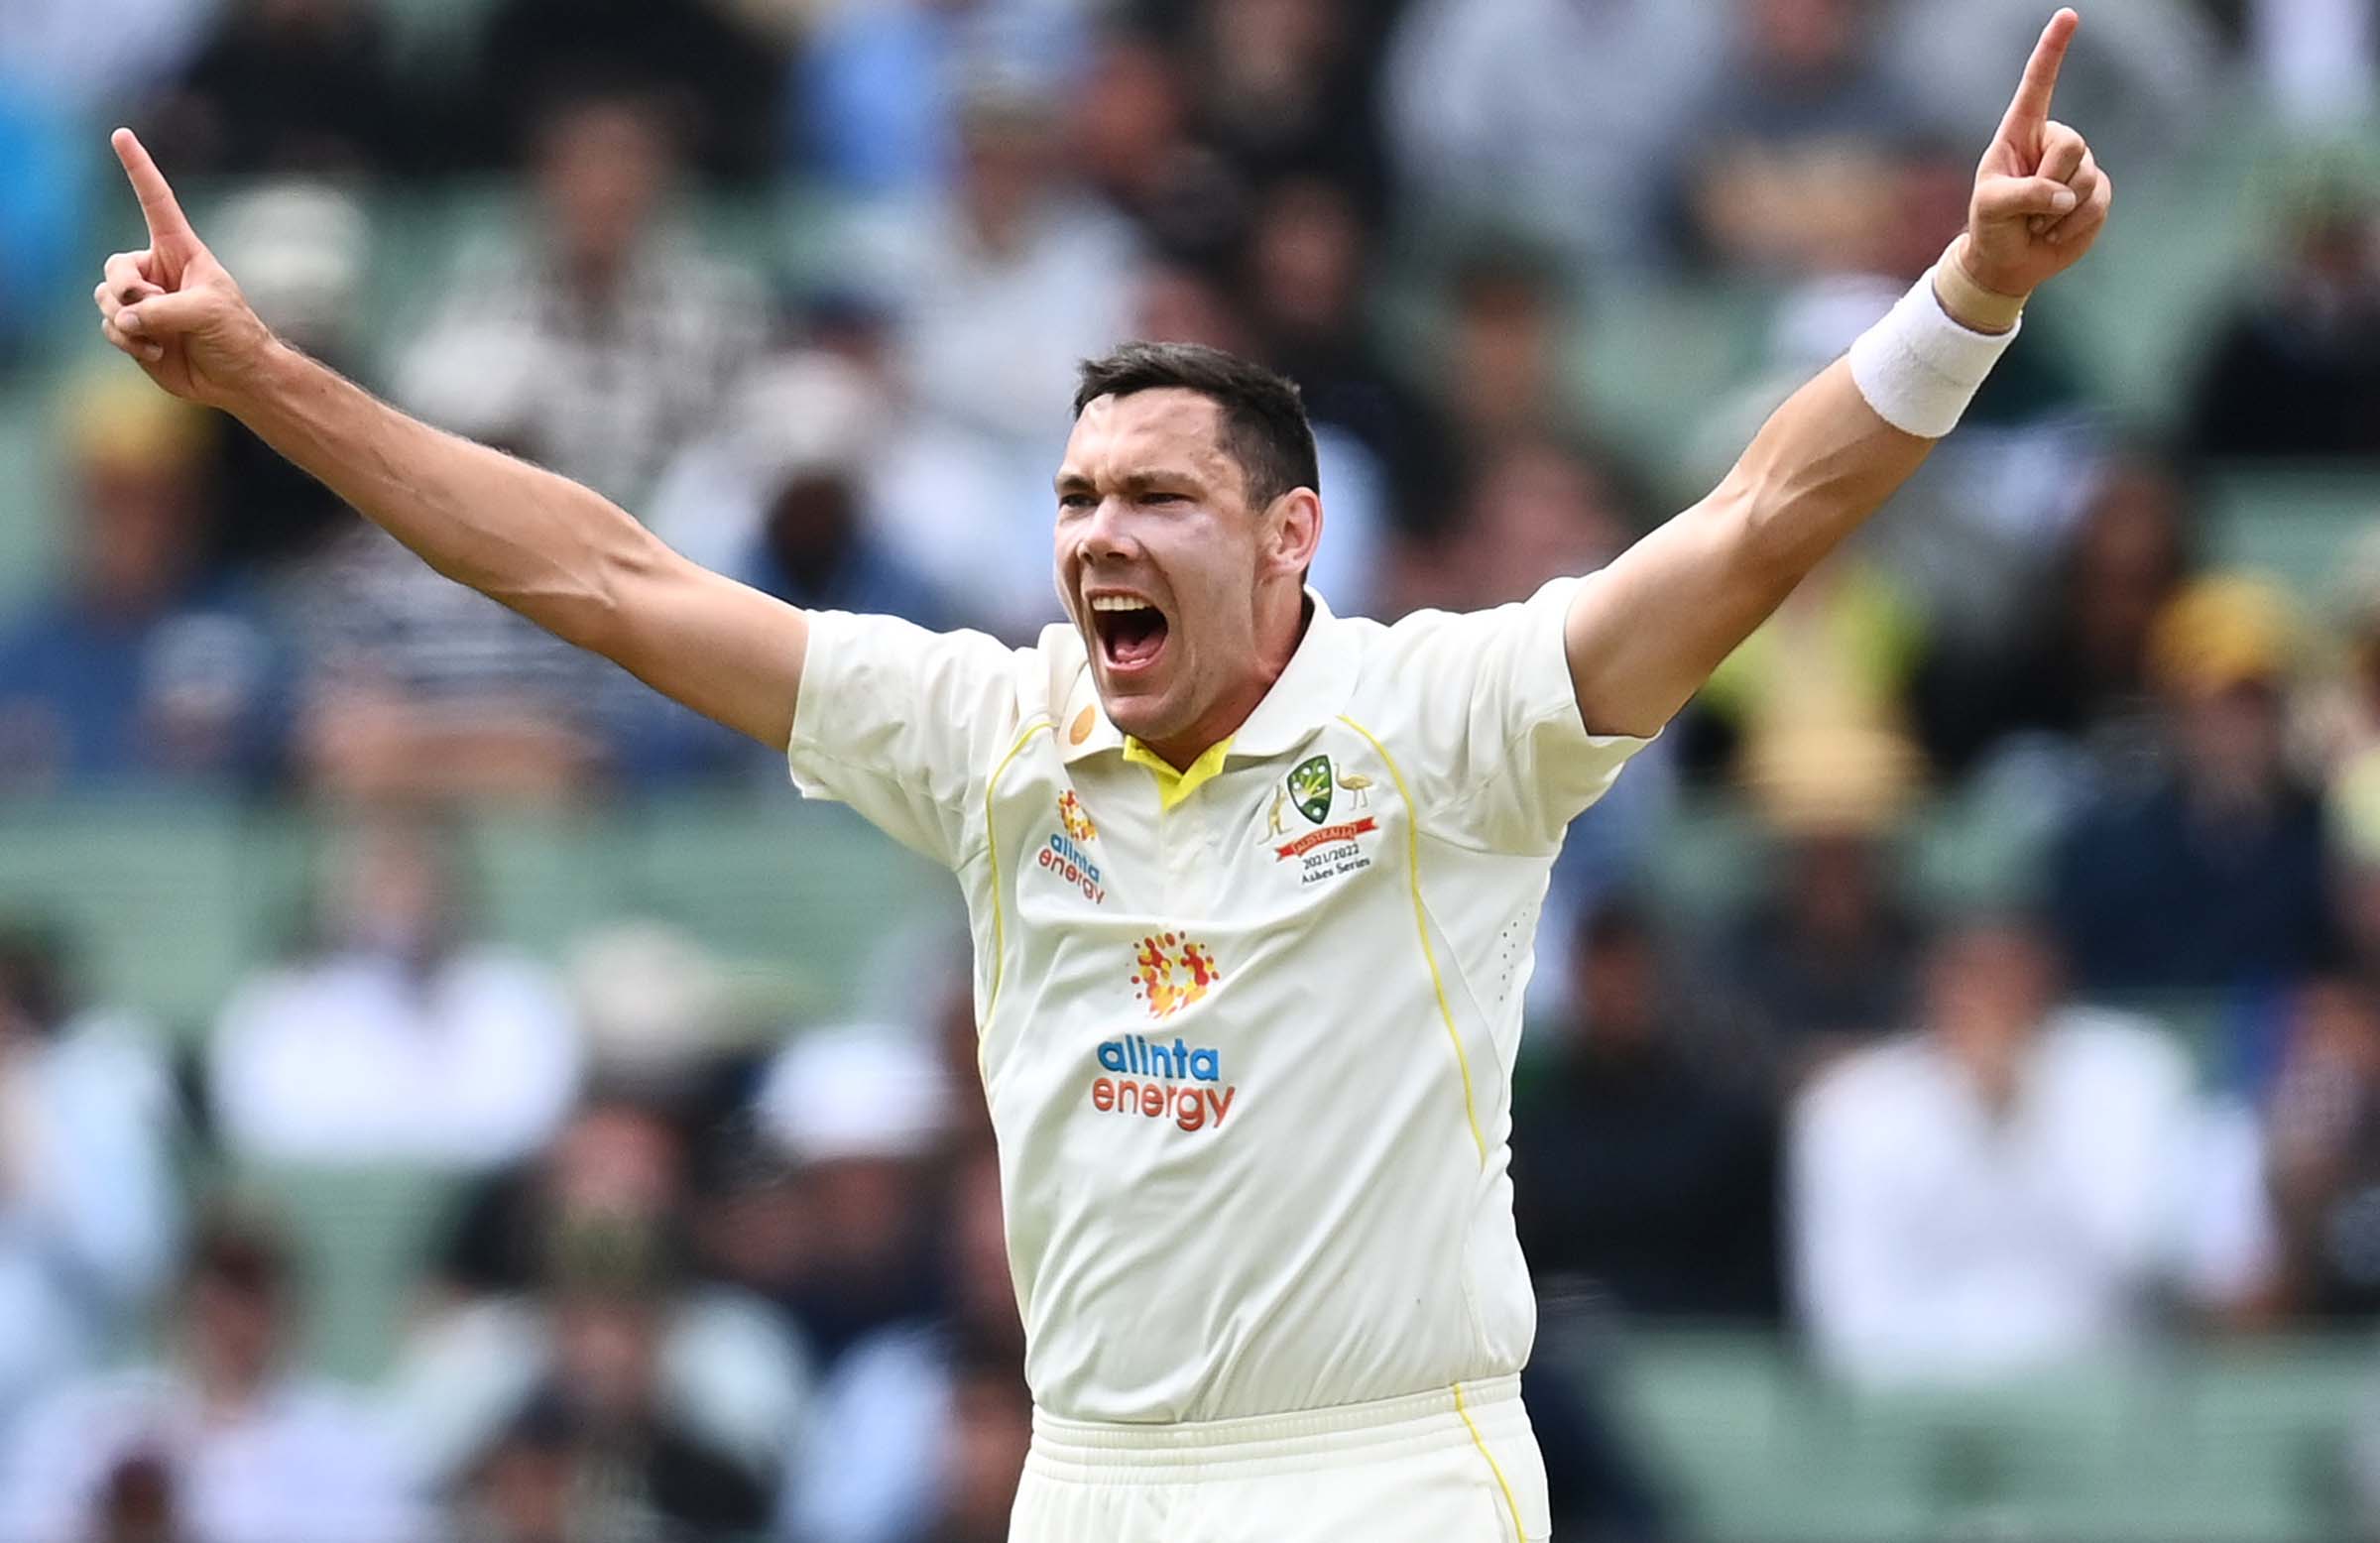 IND vs AUS LIVE: BIG Blow to Aussies, Injured pacer Josh Hazlewood likely to miss 2nd Test also, Scott Boland to make overseas DEBUT, Follow India vs Australia